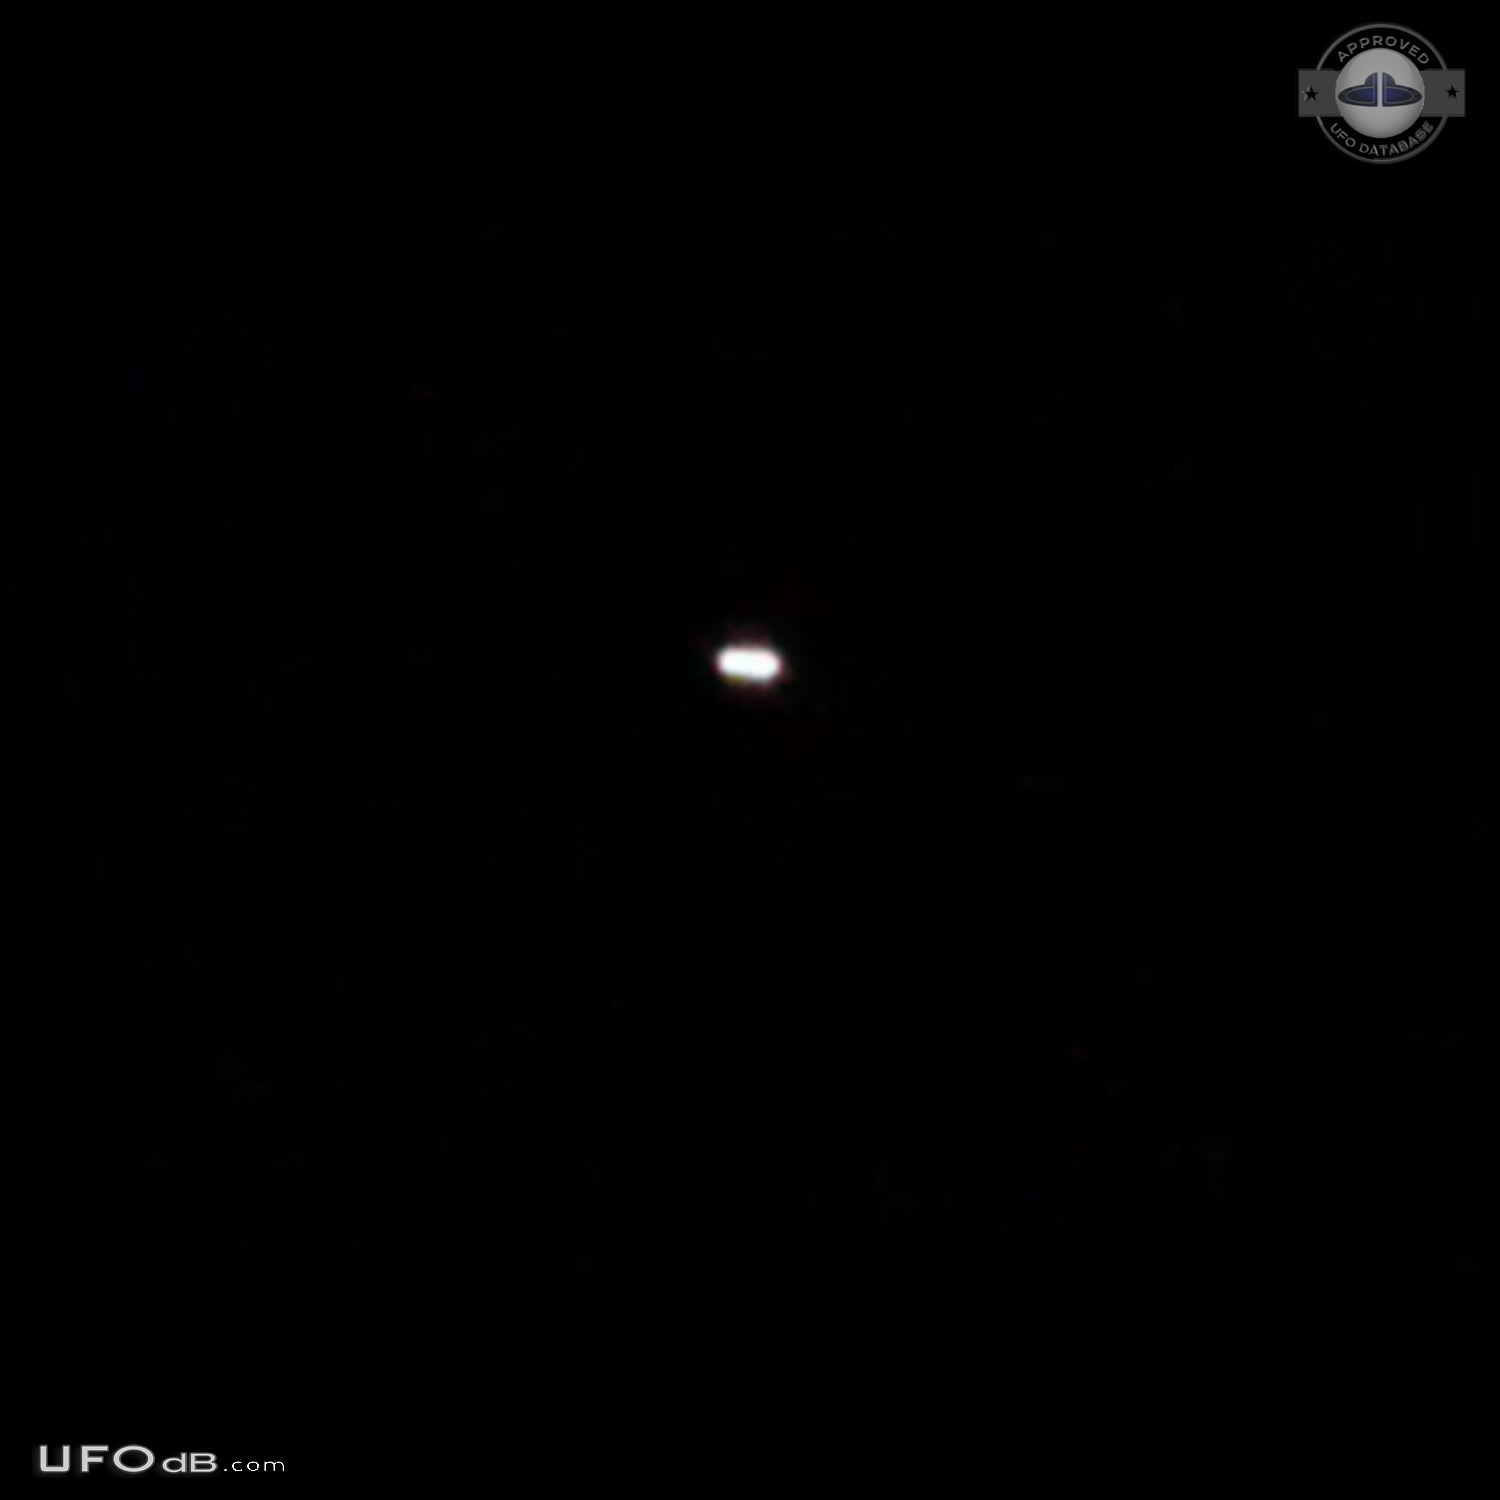 Oval UFO like a star but it disappeared - Bergen New York USA 2015 UFO Picture #731-1